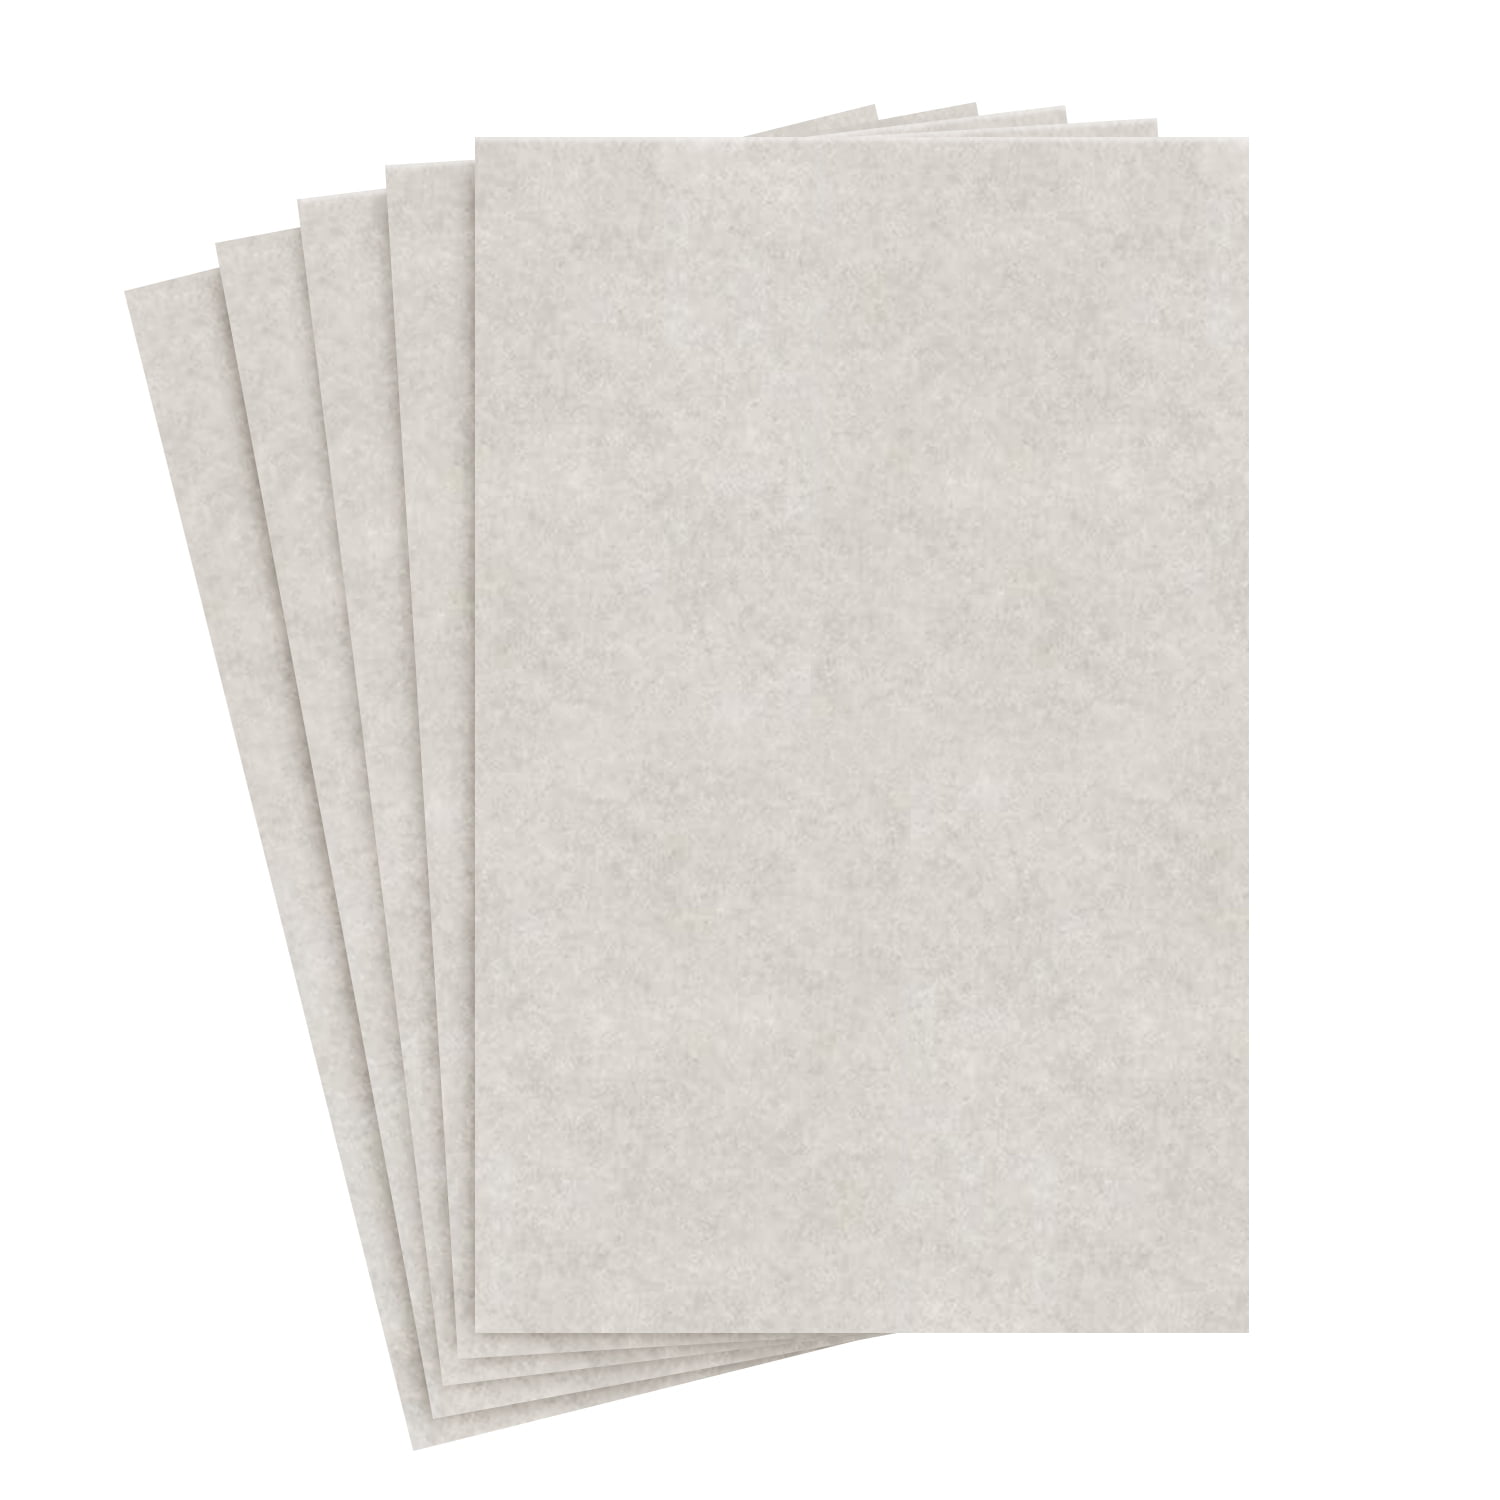 100 Old Age Parchment Paper for Writing - 24/60# Text Sheets - B5 (6.9X9.8  inches) European and Planner Size - Not Card Weight - Vintage Colored Old